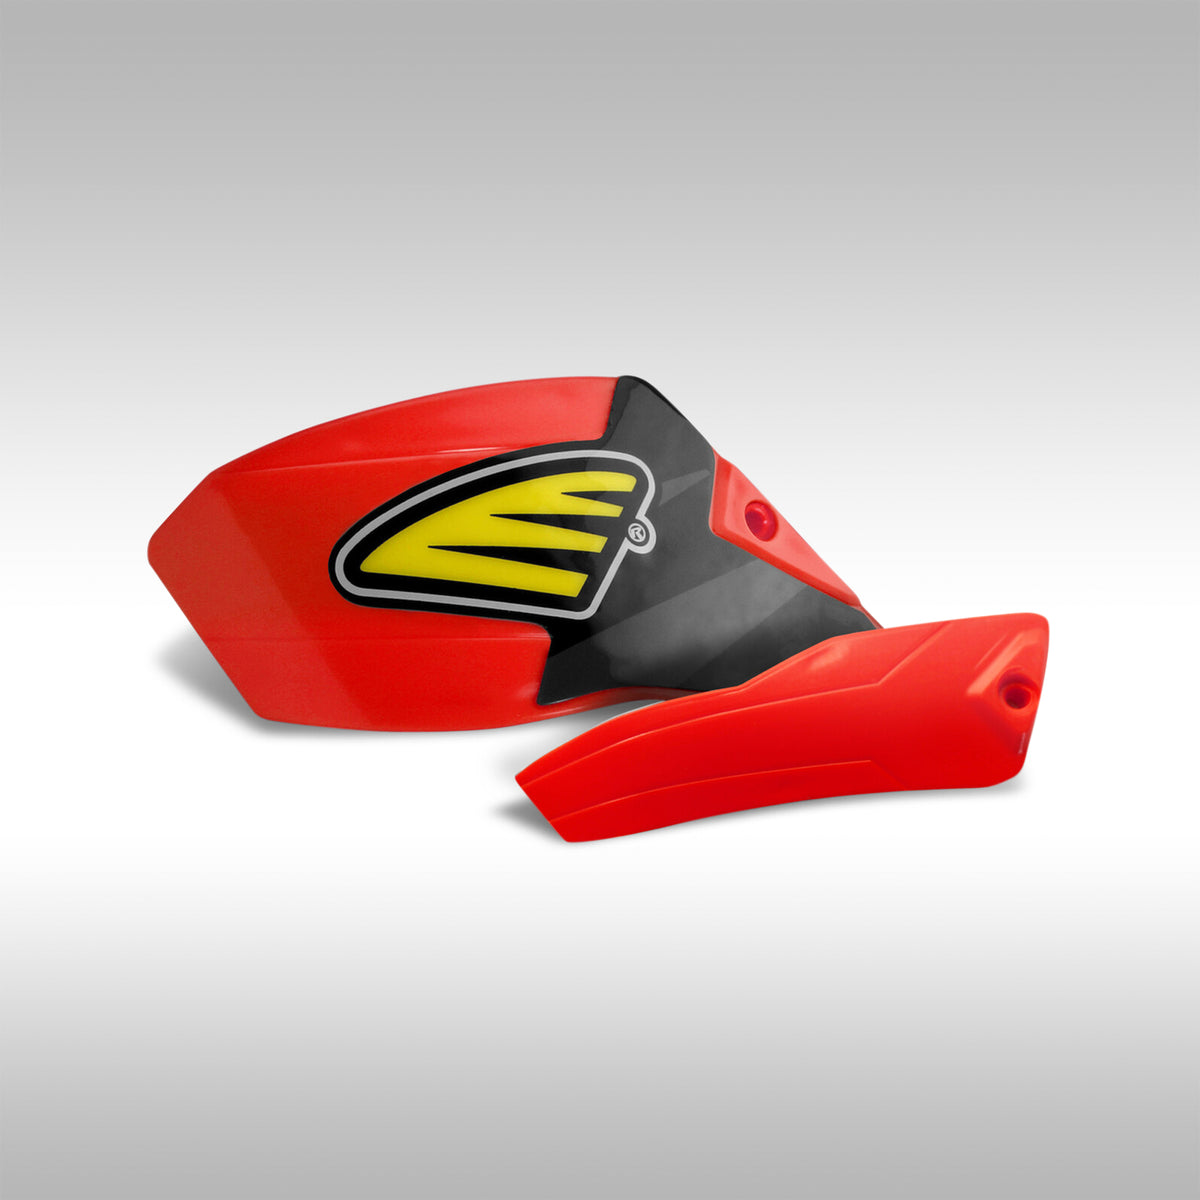 CYCRA - PROBEND ULTRA HAND SHIELD COVERS REPLACEMENT